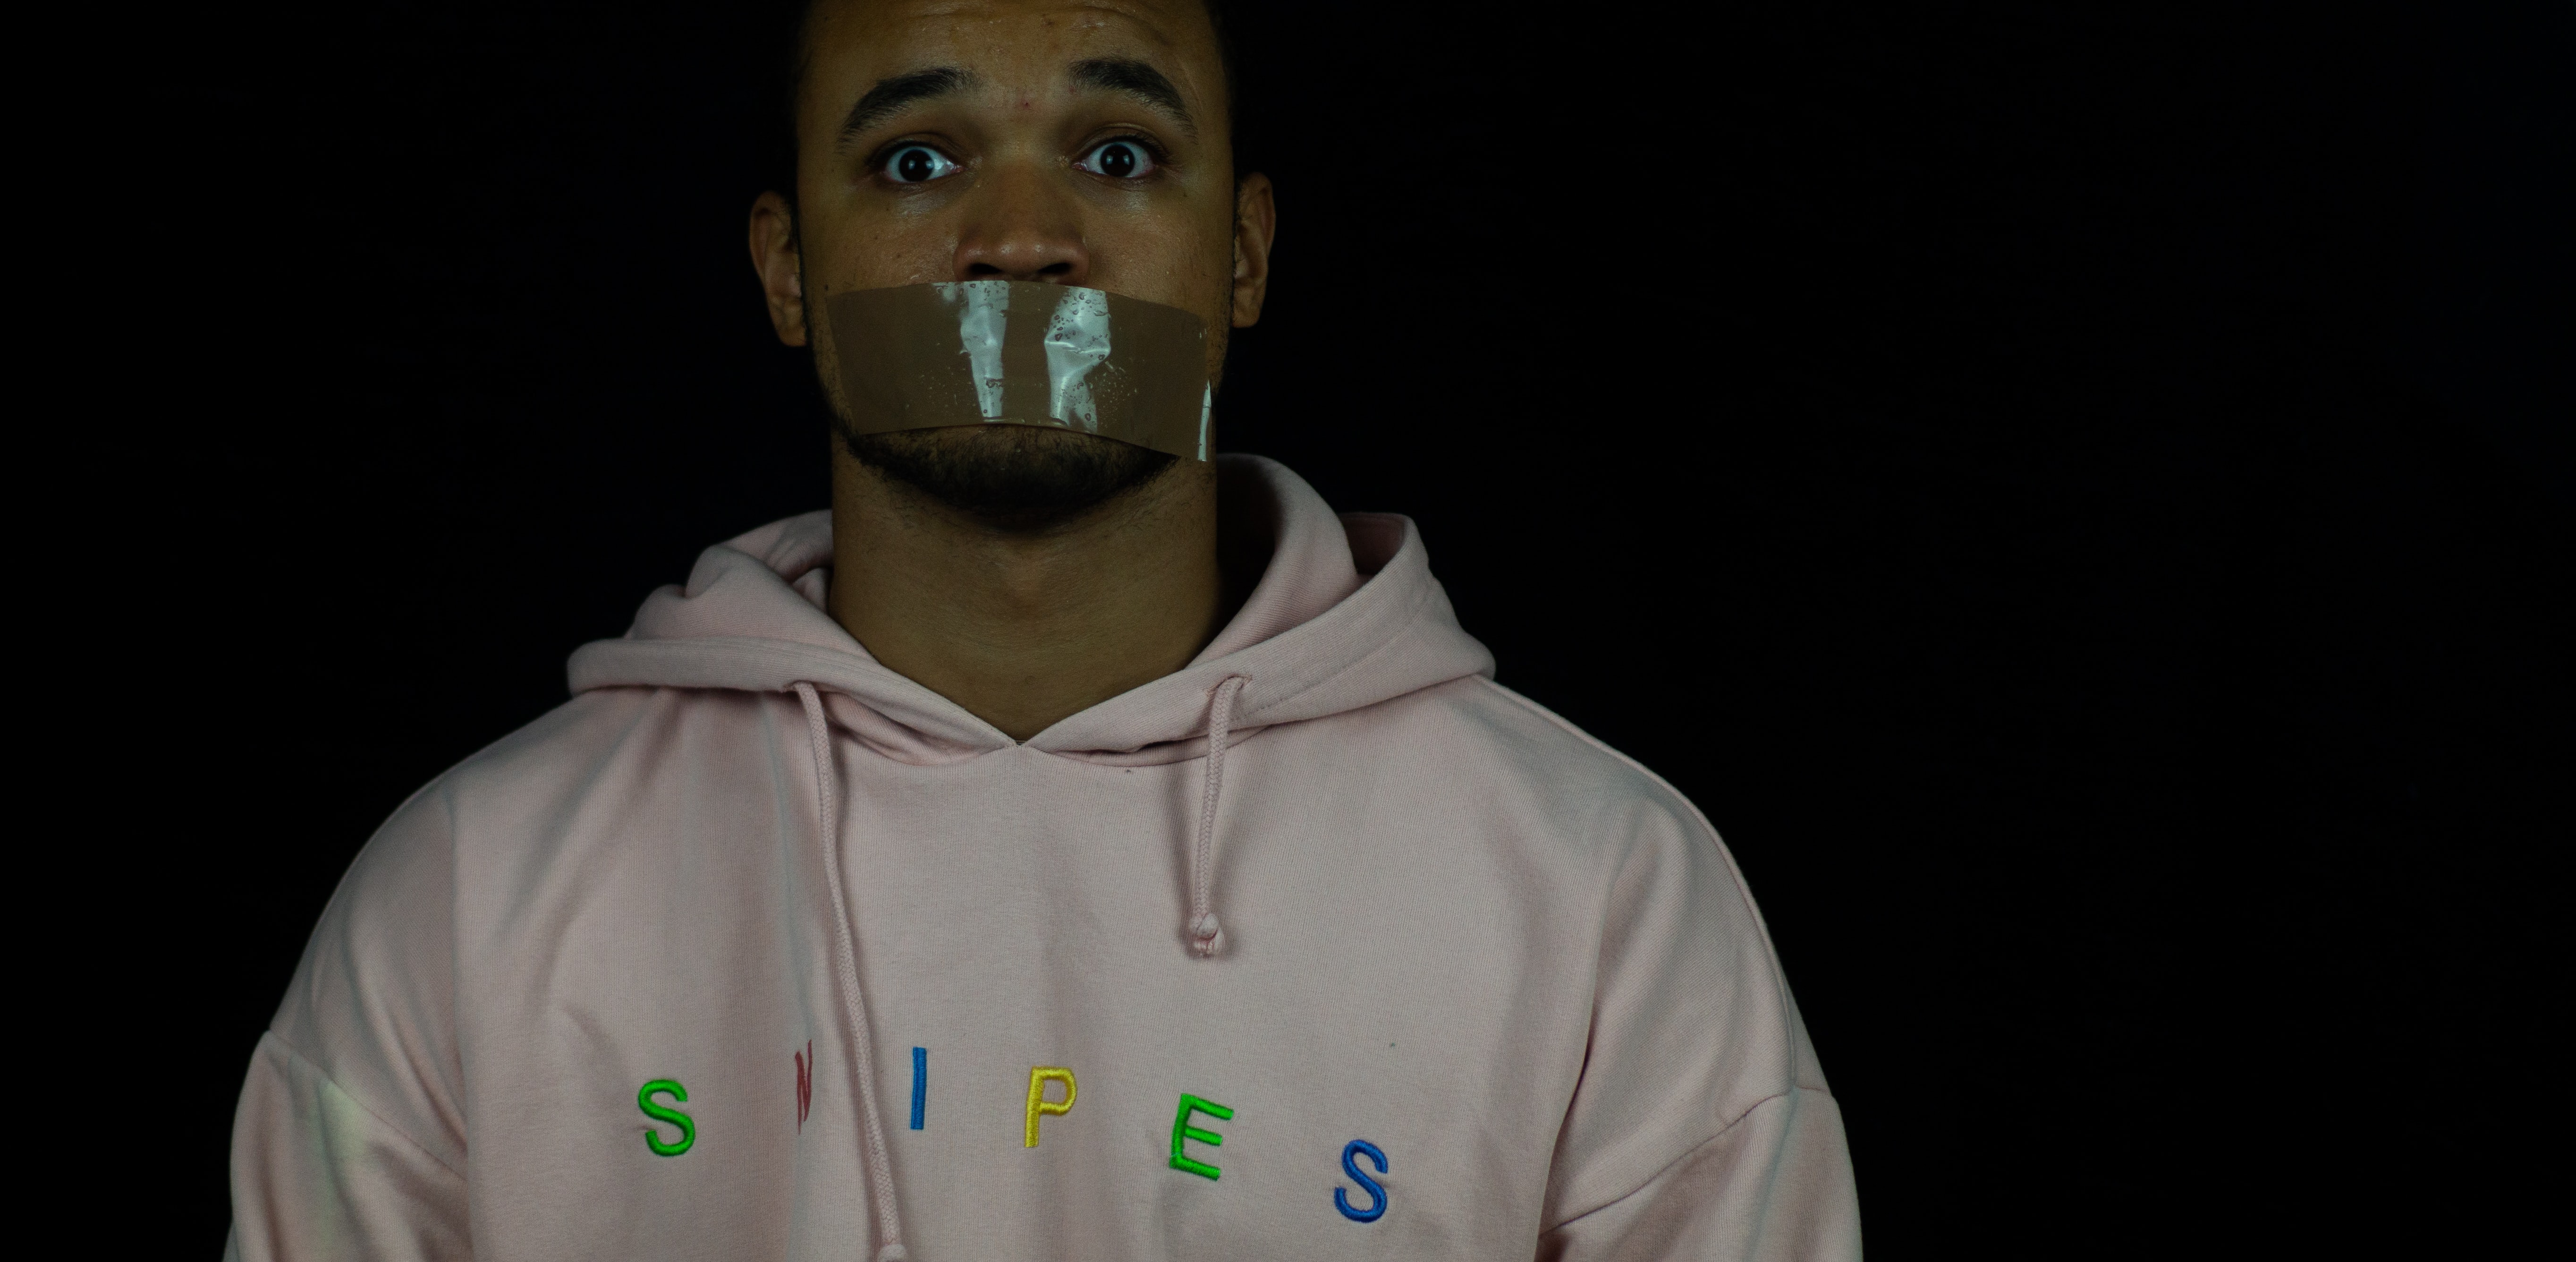 Man in white hoodie with mouth taped shut; image by Khadim Fall, via Unsplash.com.